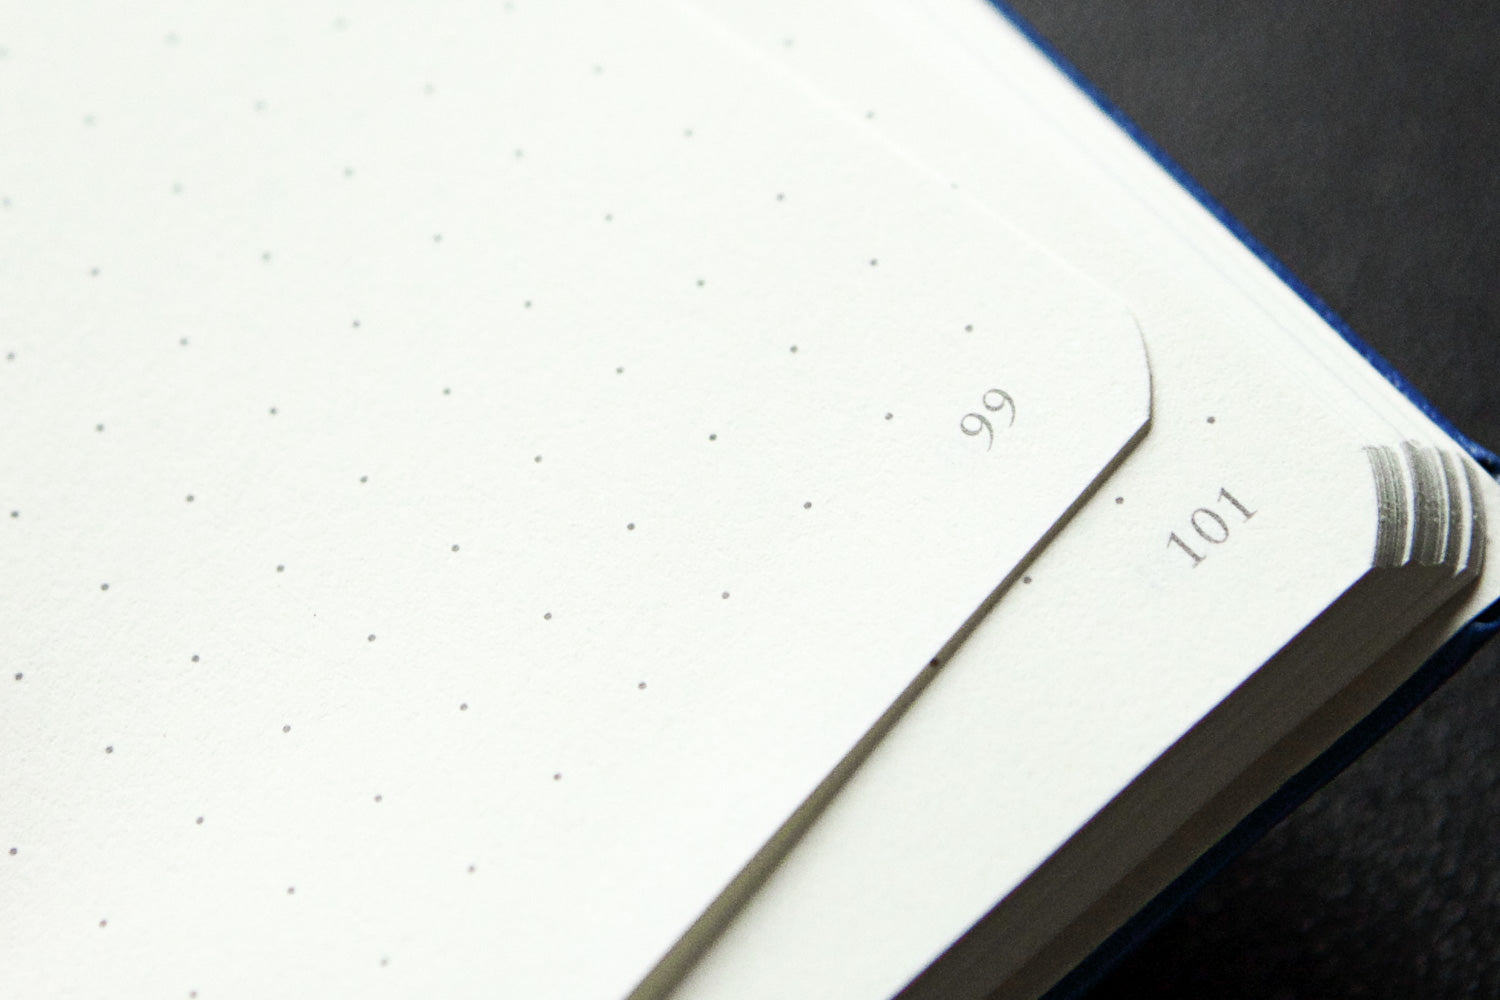 Numbered pages on a dot grid notebook